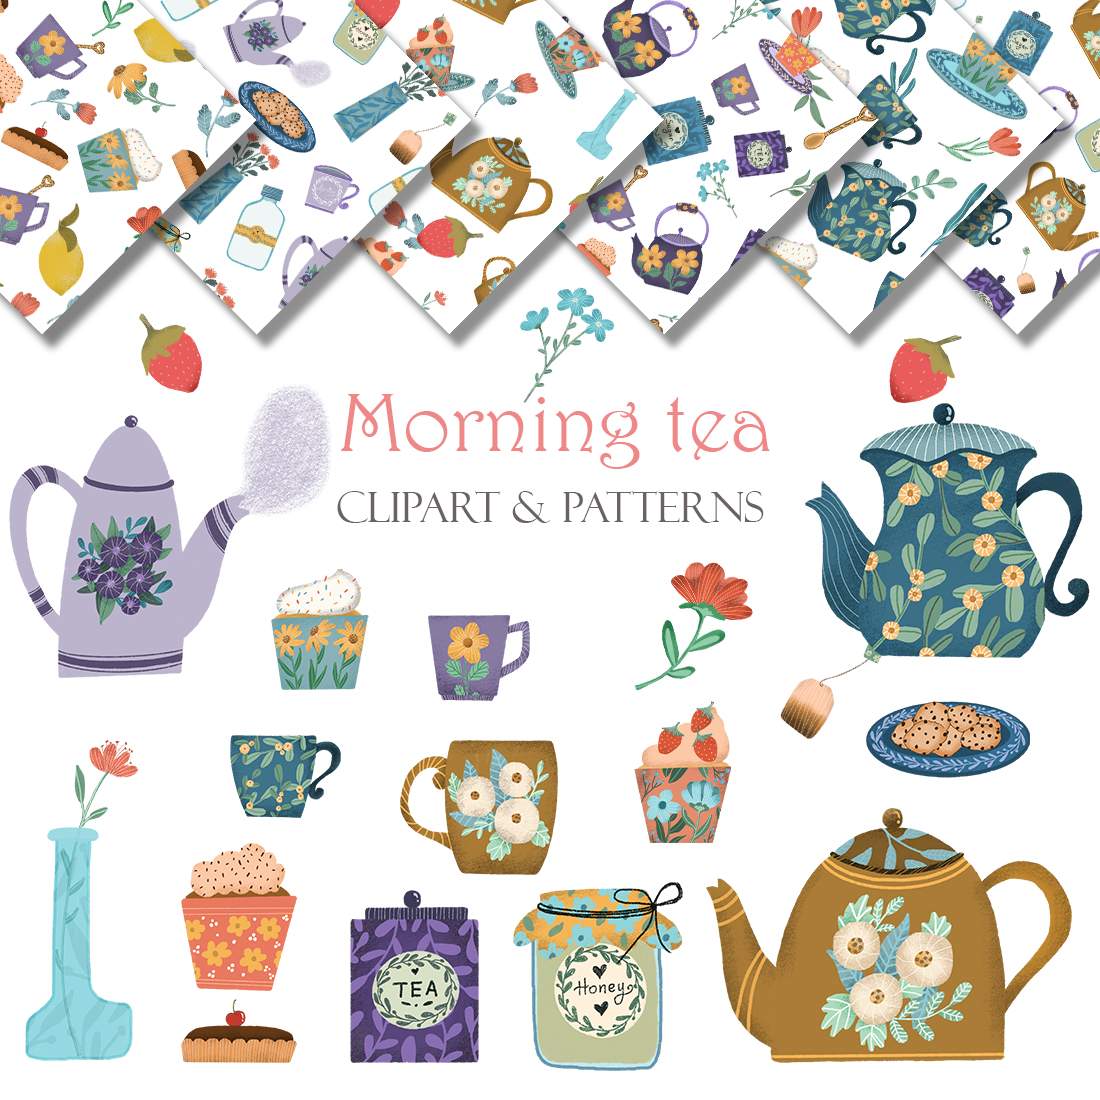 Morning tea clipart, patterns, premade posters set cover image.